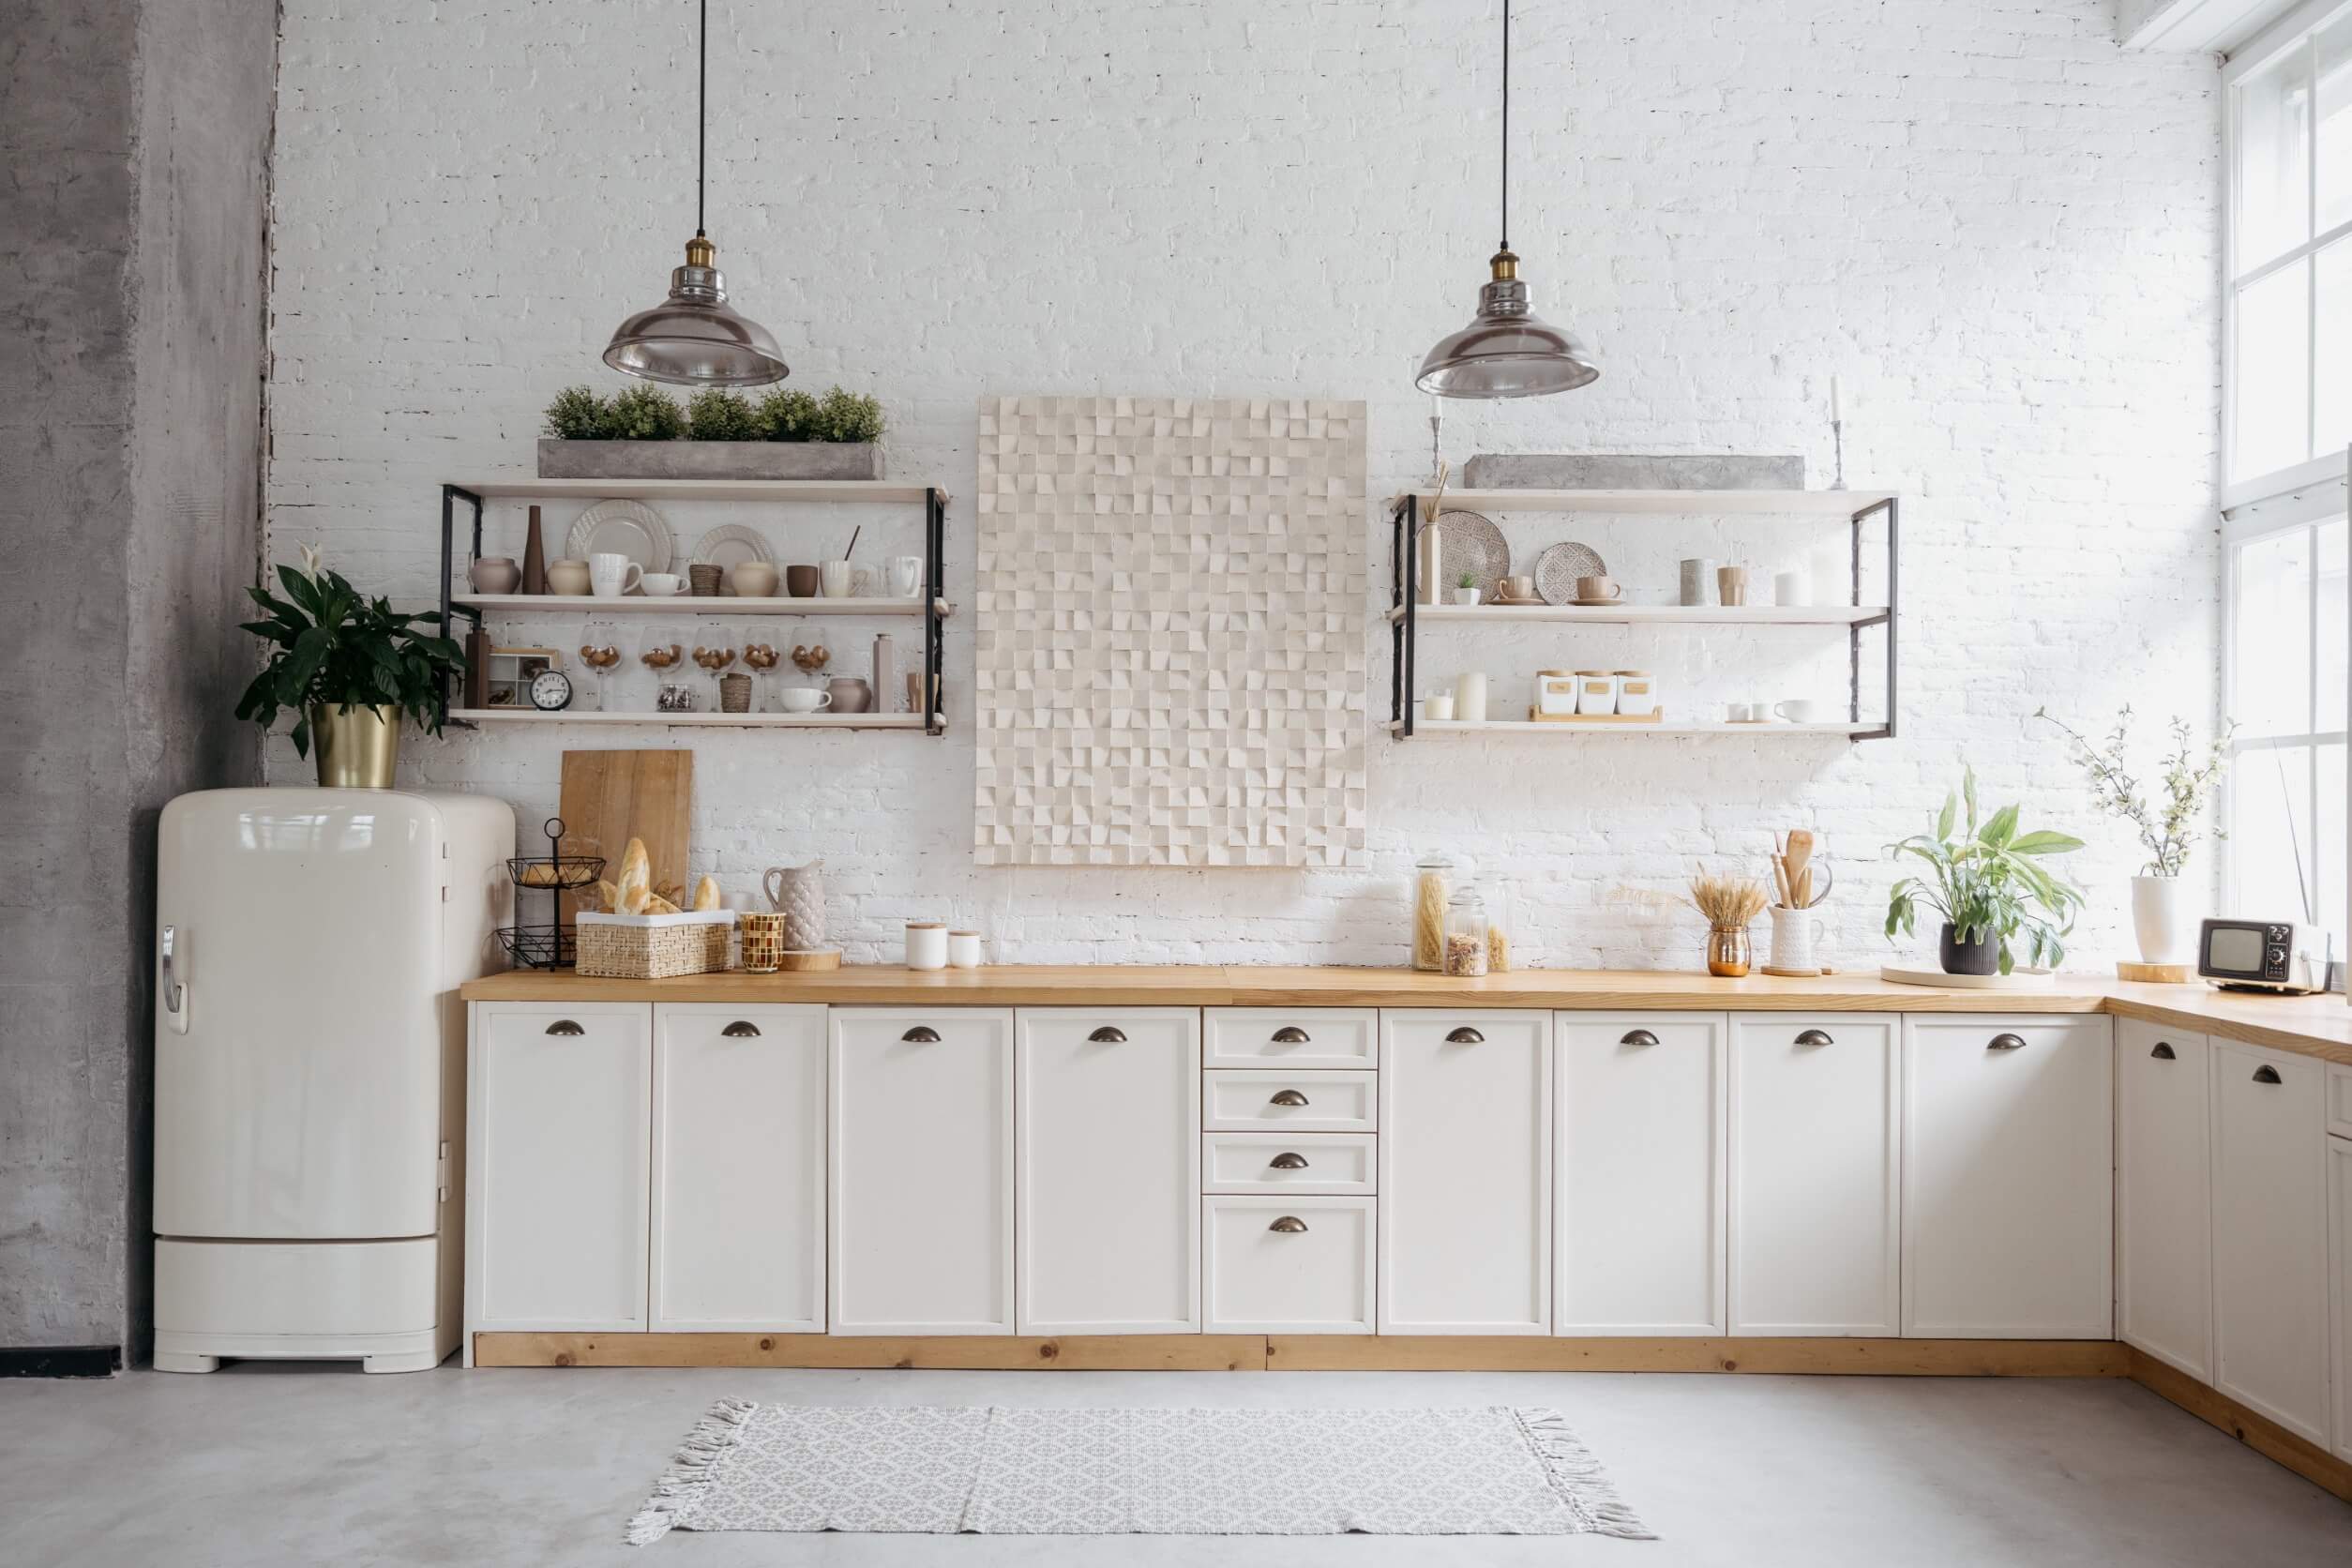 Updated rustic kitchen interior with white brick wall.